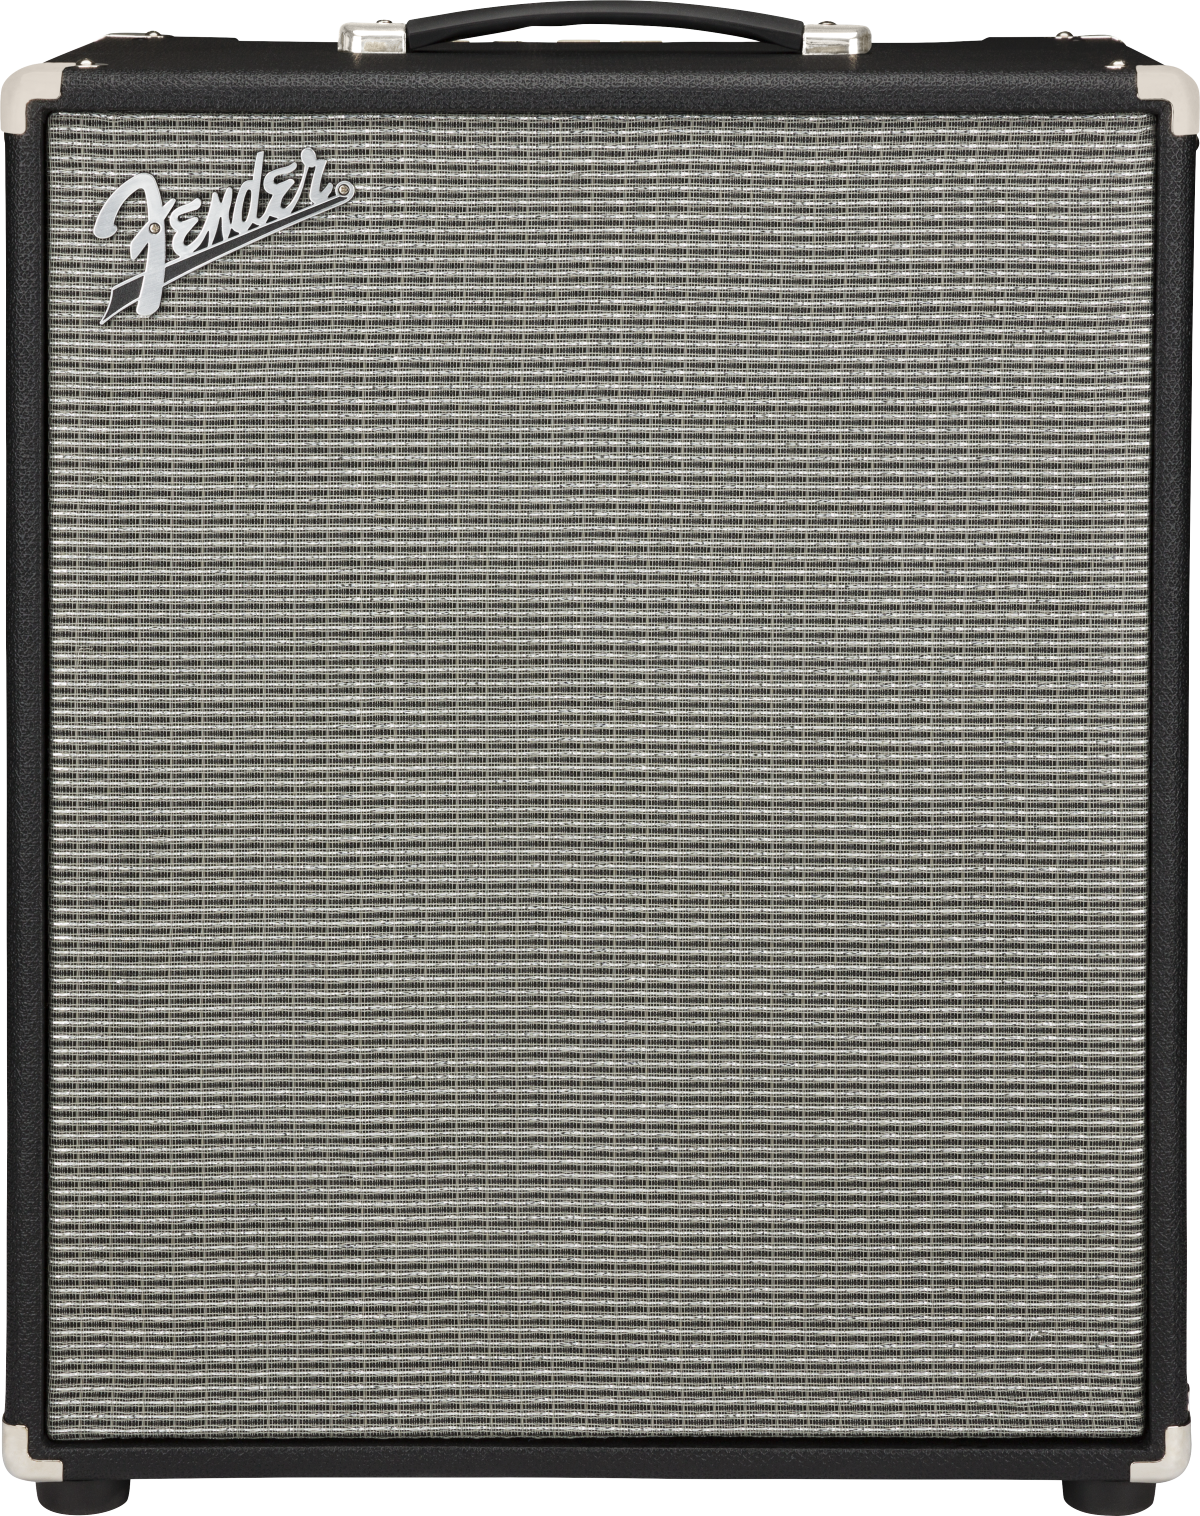 Front of Fender Rumble 800 Combo 120V.